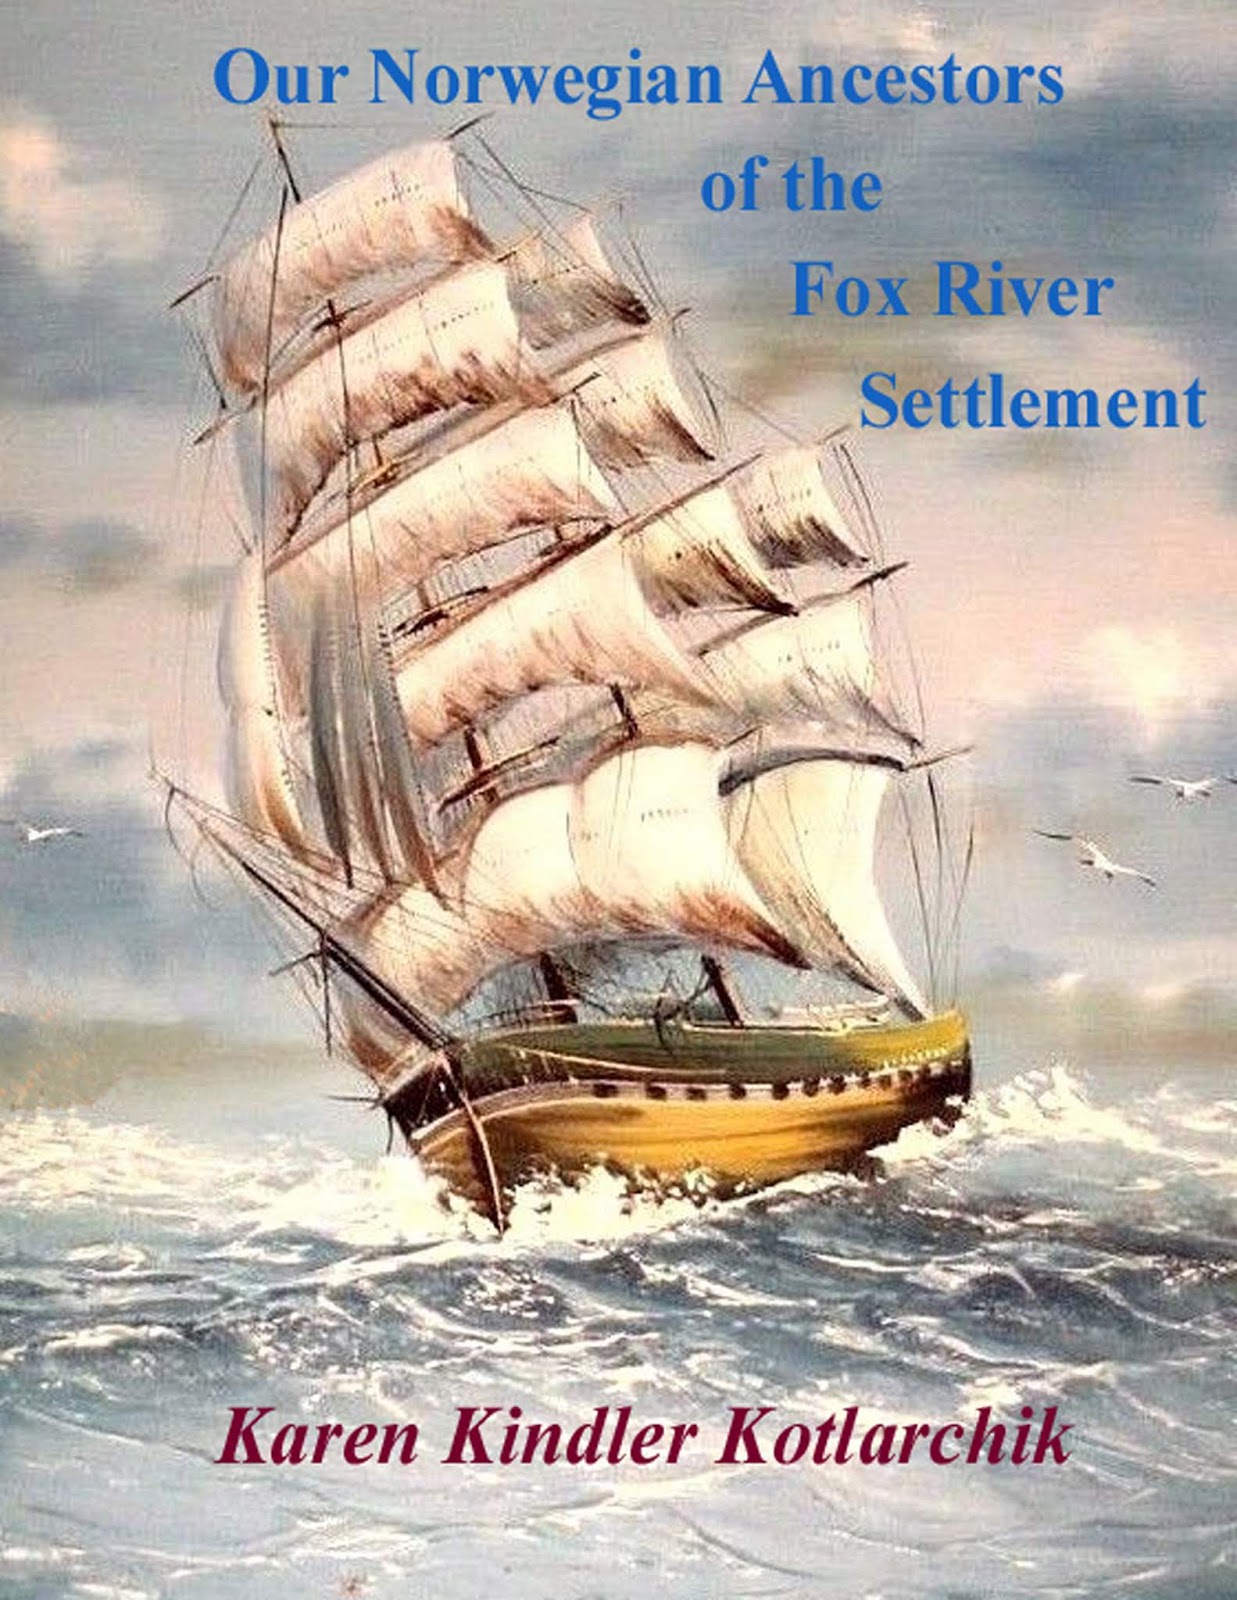 Our Norwegian Ancestors of the Settlement: "Our Norwegian Ancestors of Fox River Settlement"